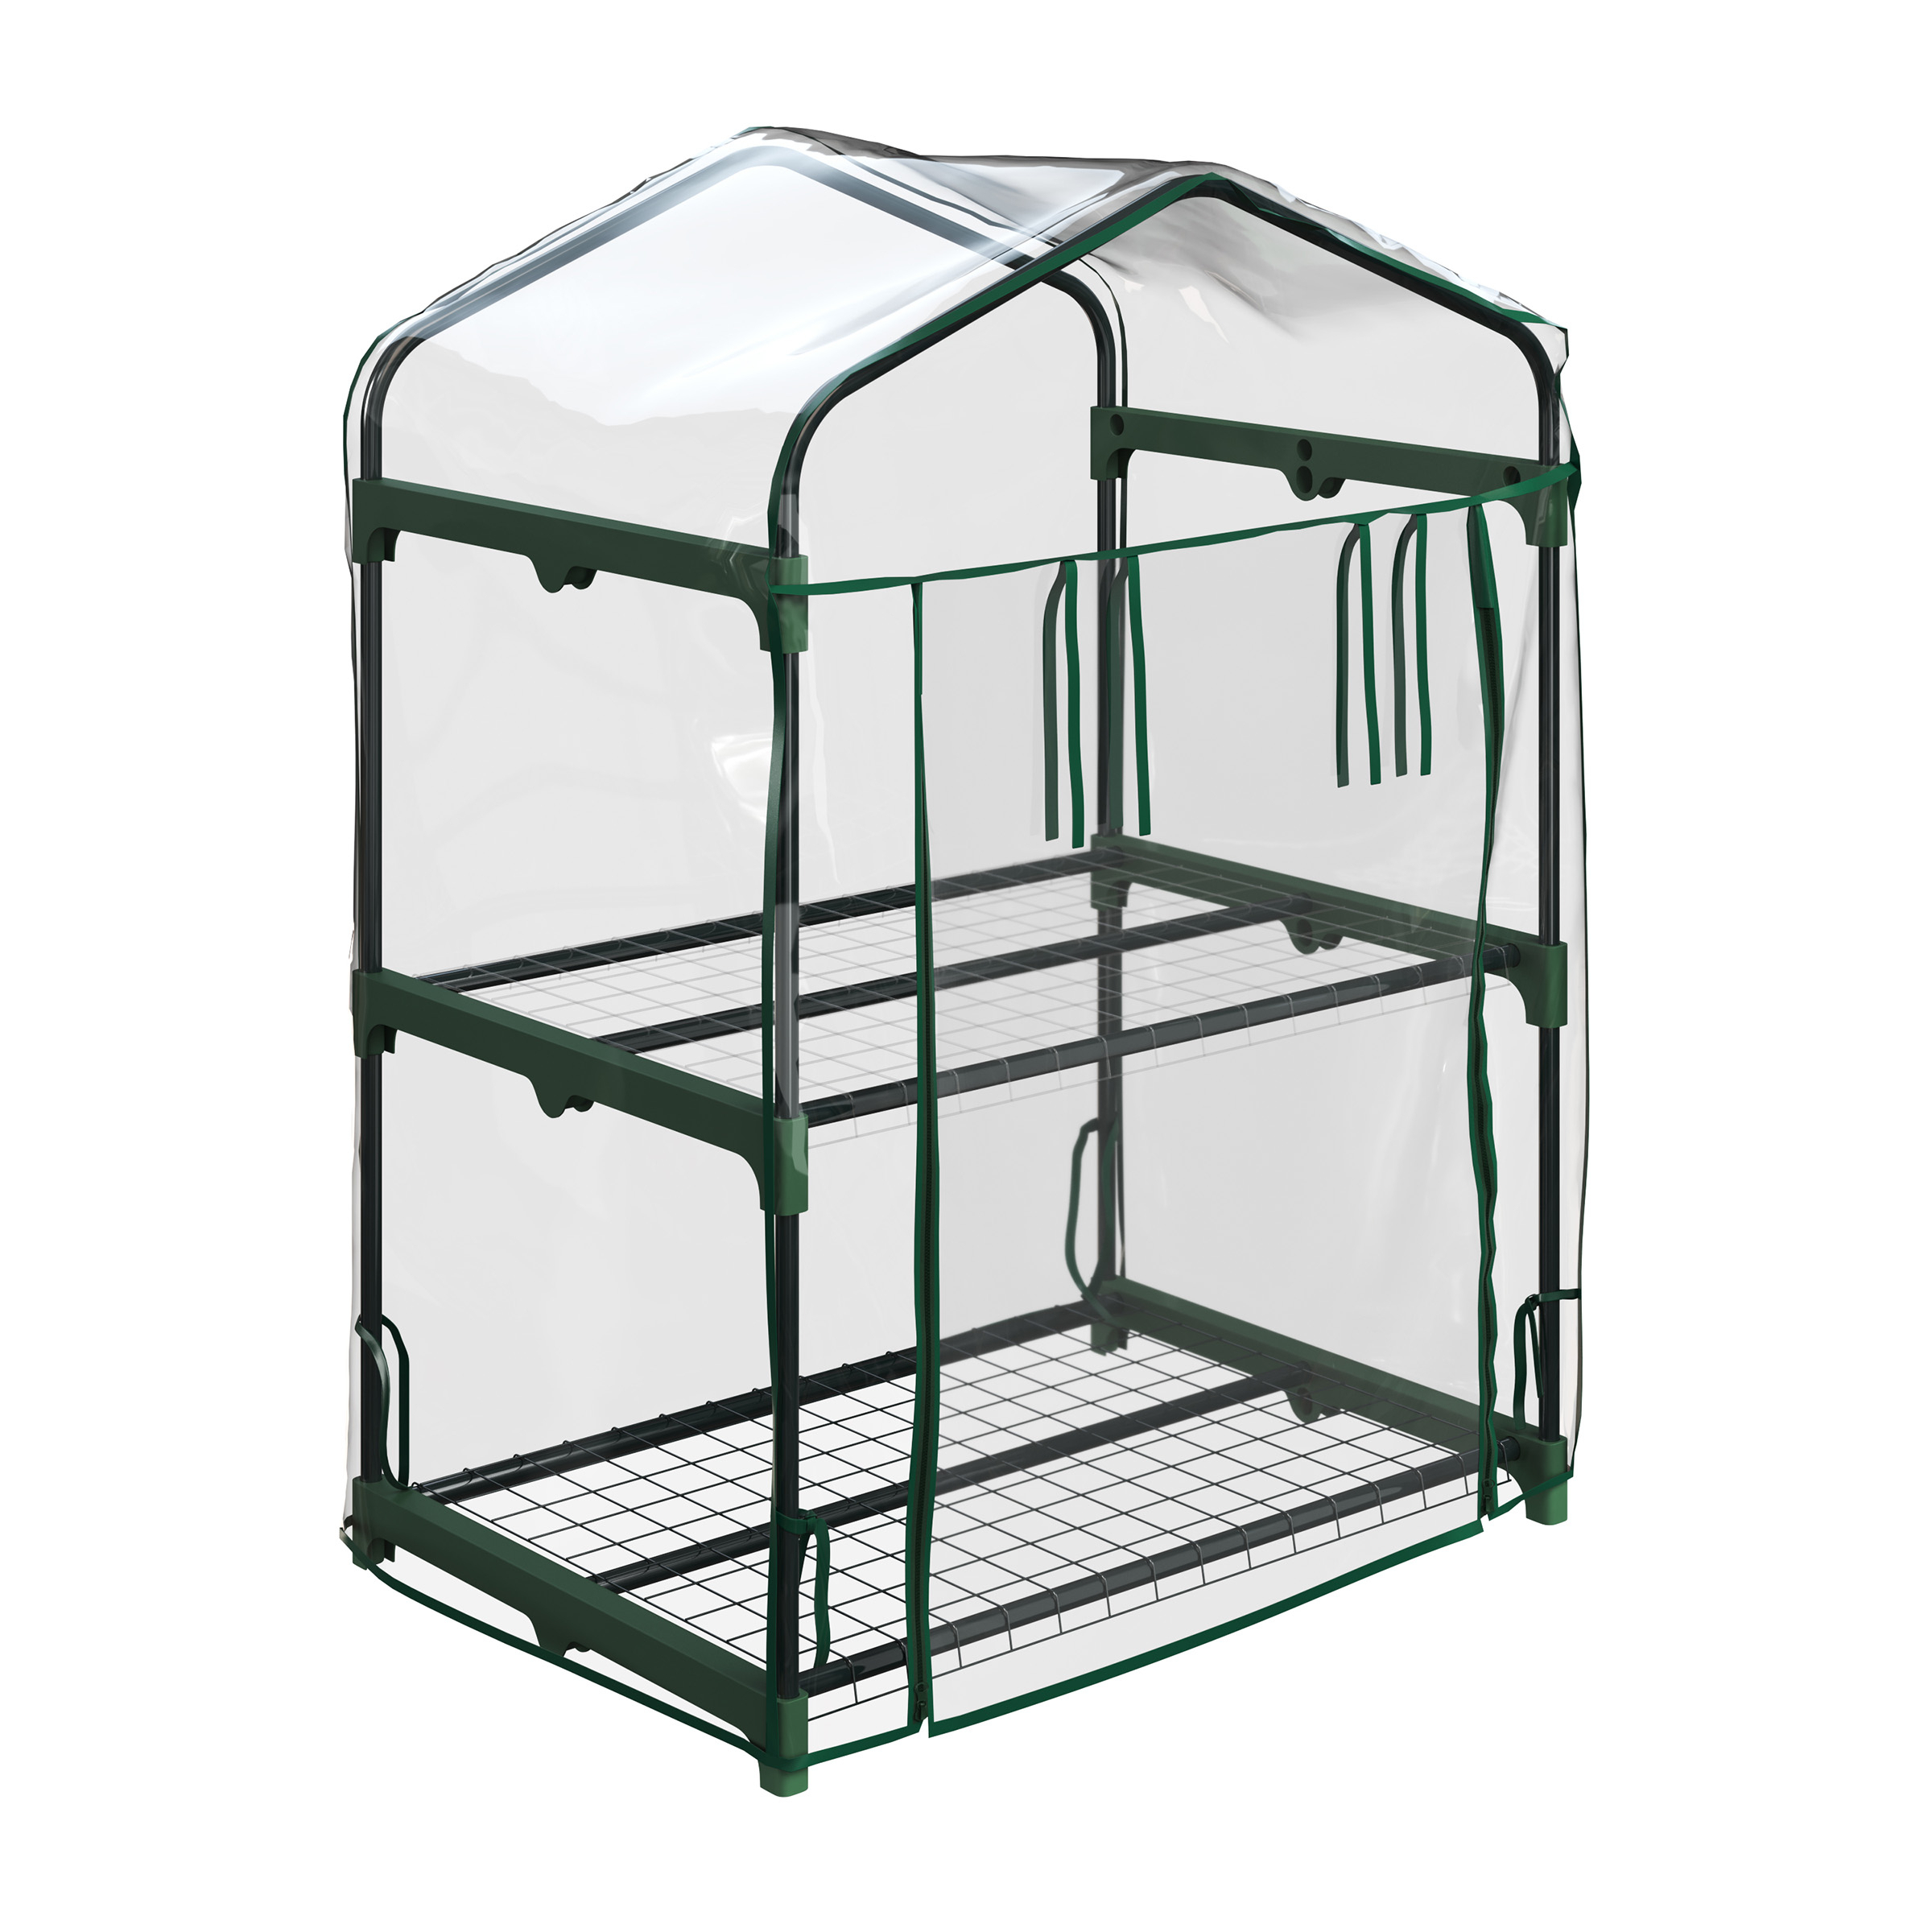 2 Tier Mini Greenhouse - Portable Greenhouse With Steel Frame And PVC Cover For Indoor Or Outdoor - Green House By Home-Complete